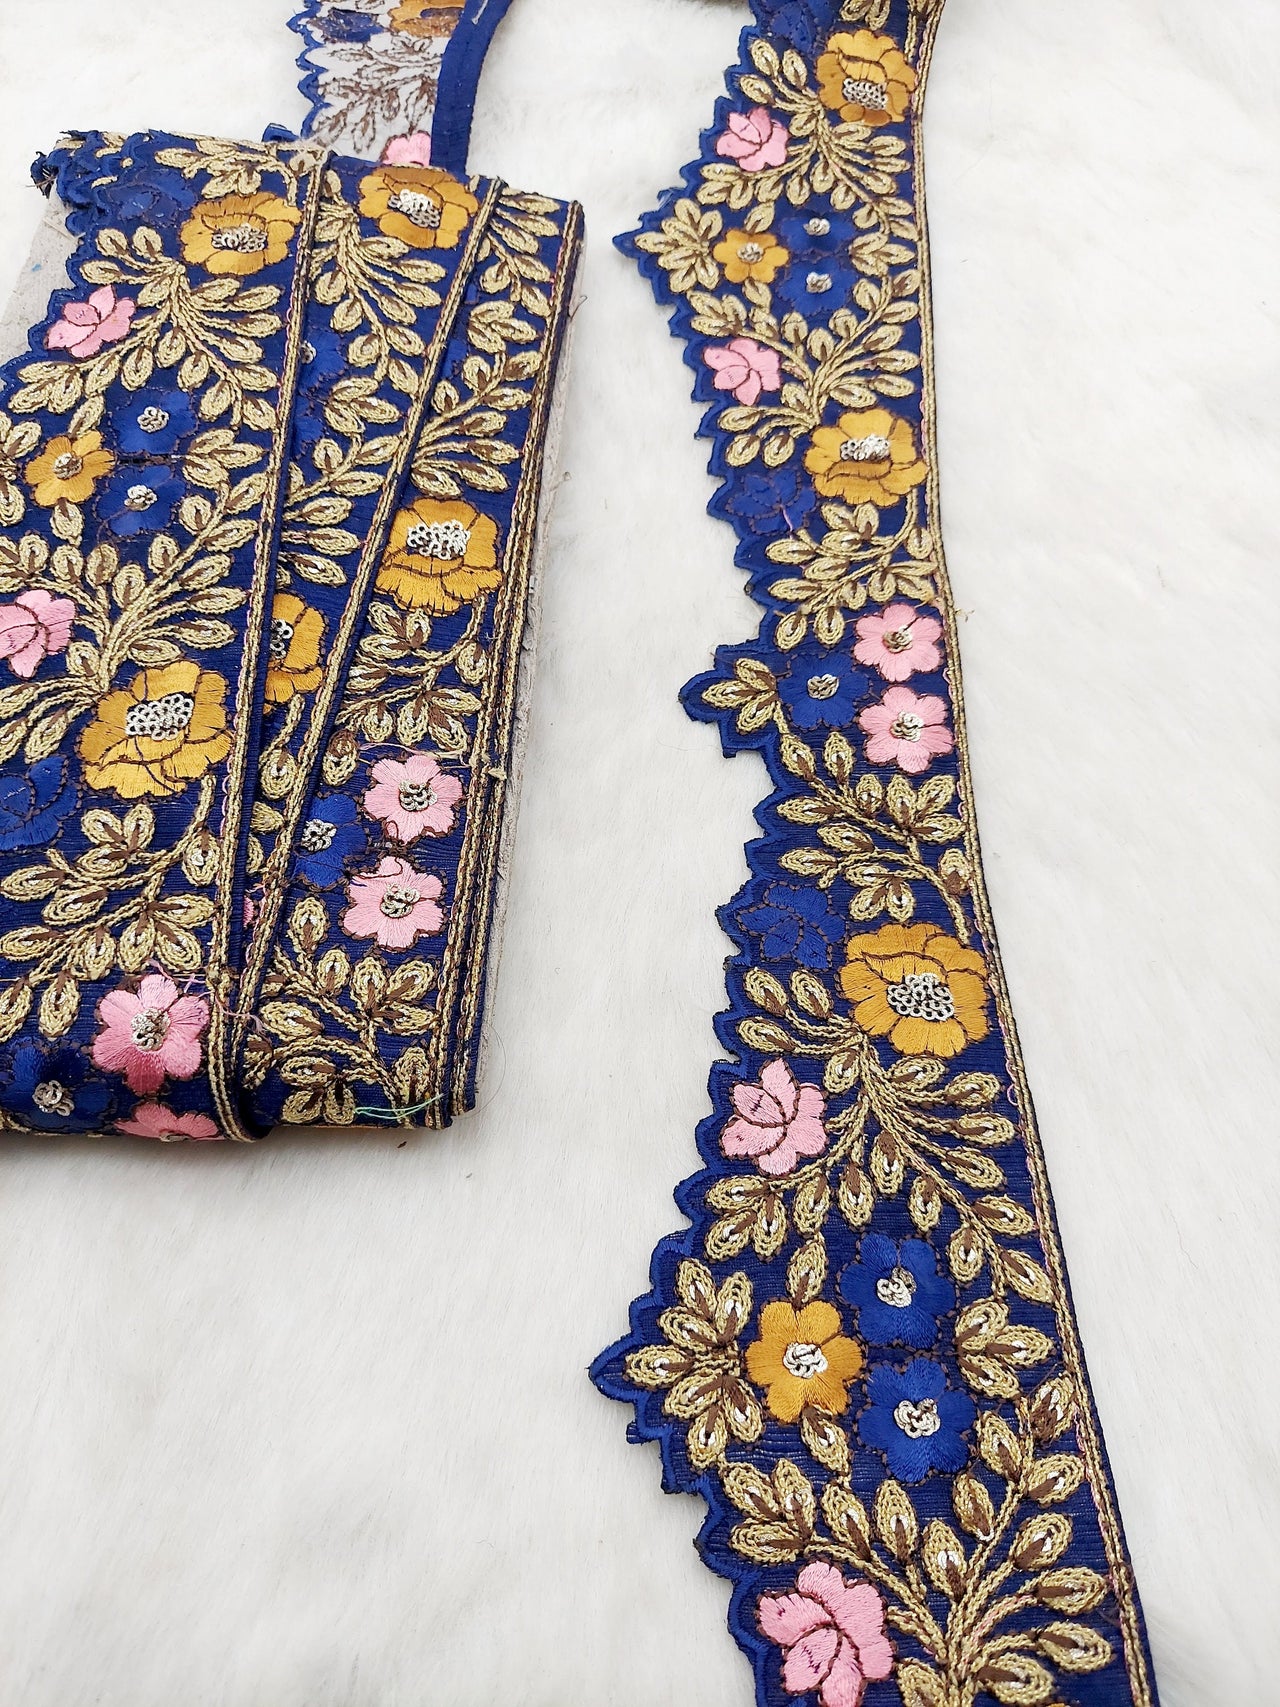 Art Silk Hand Embroidered Cutwork Lace Trim In Gold Floral Embroidery, Sari Border, Trim by Yard